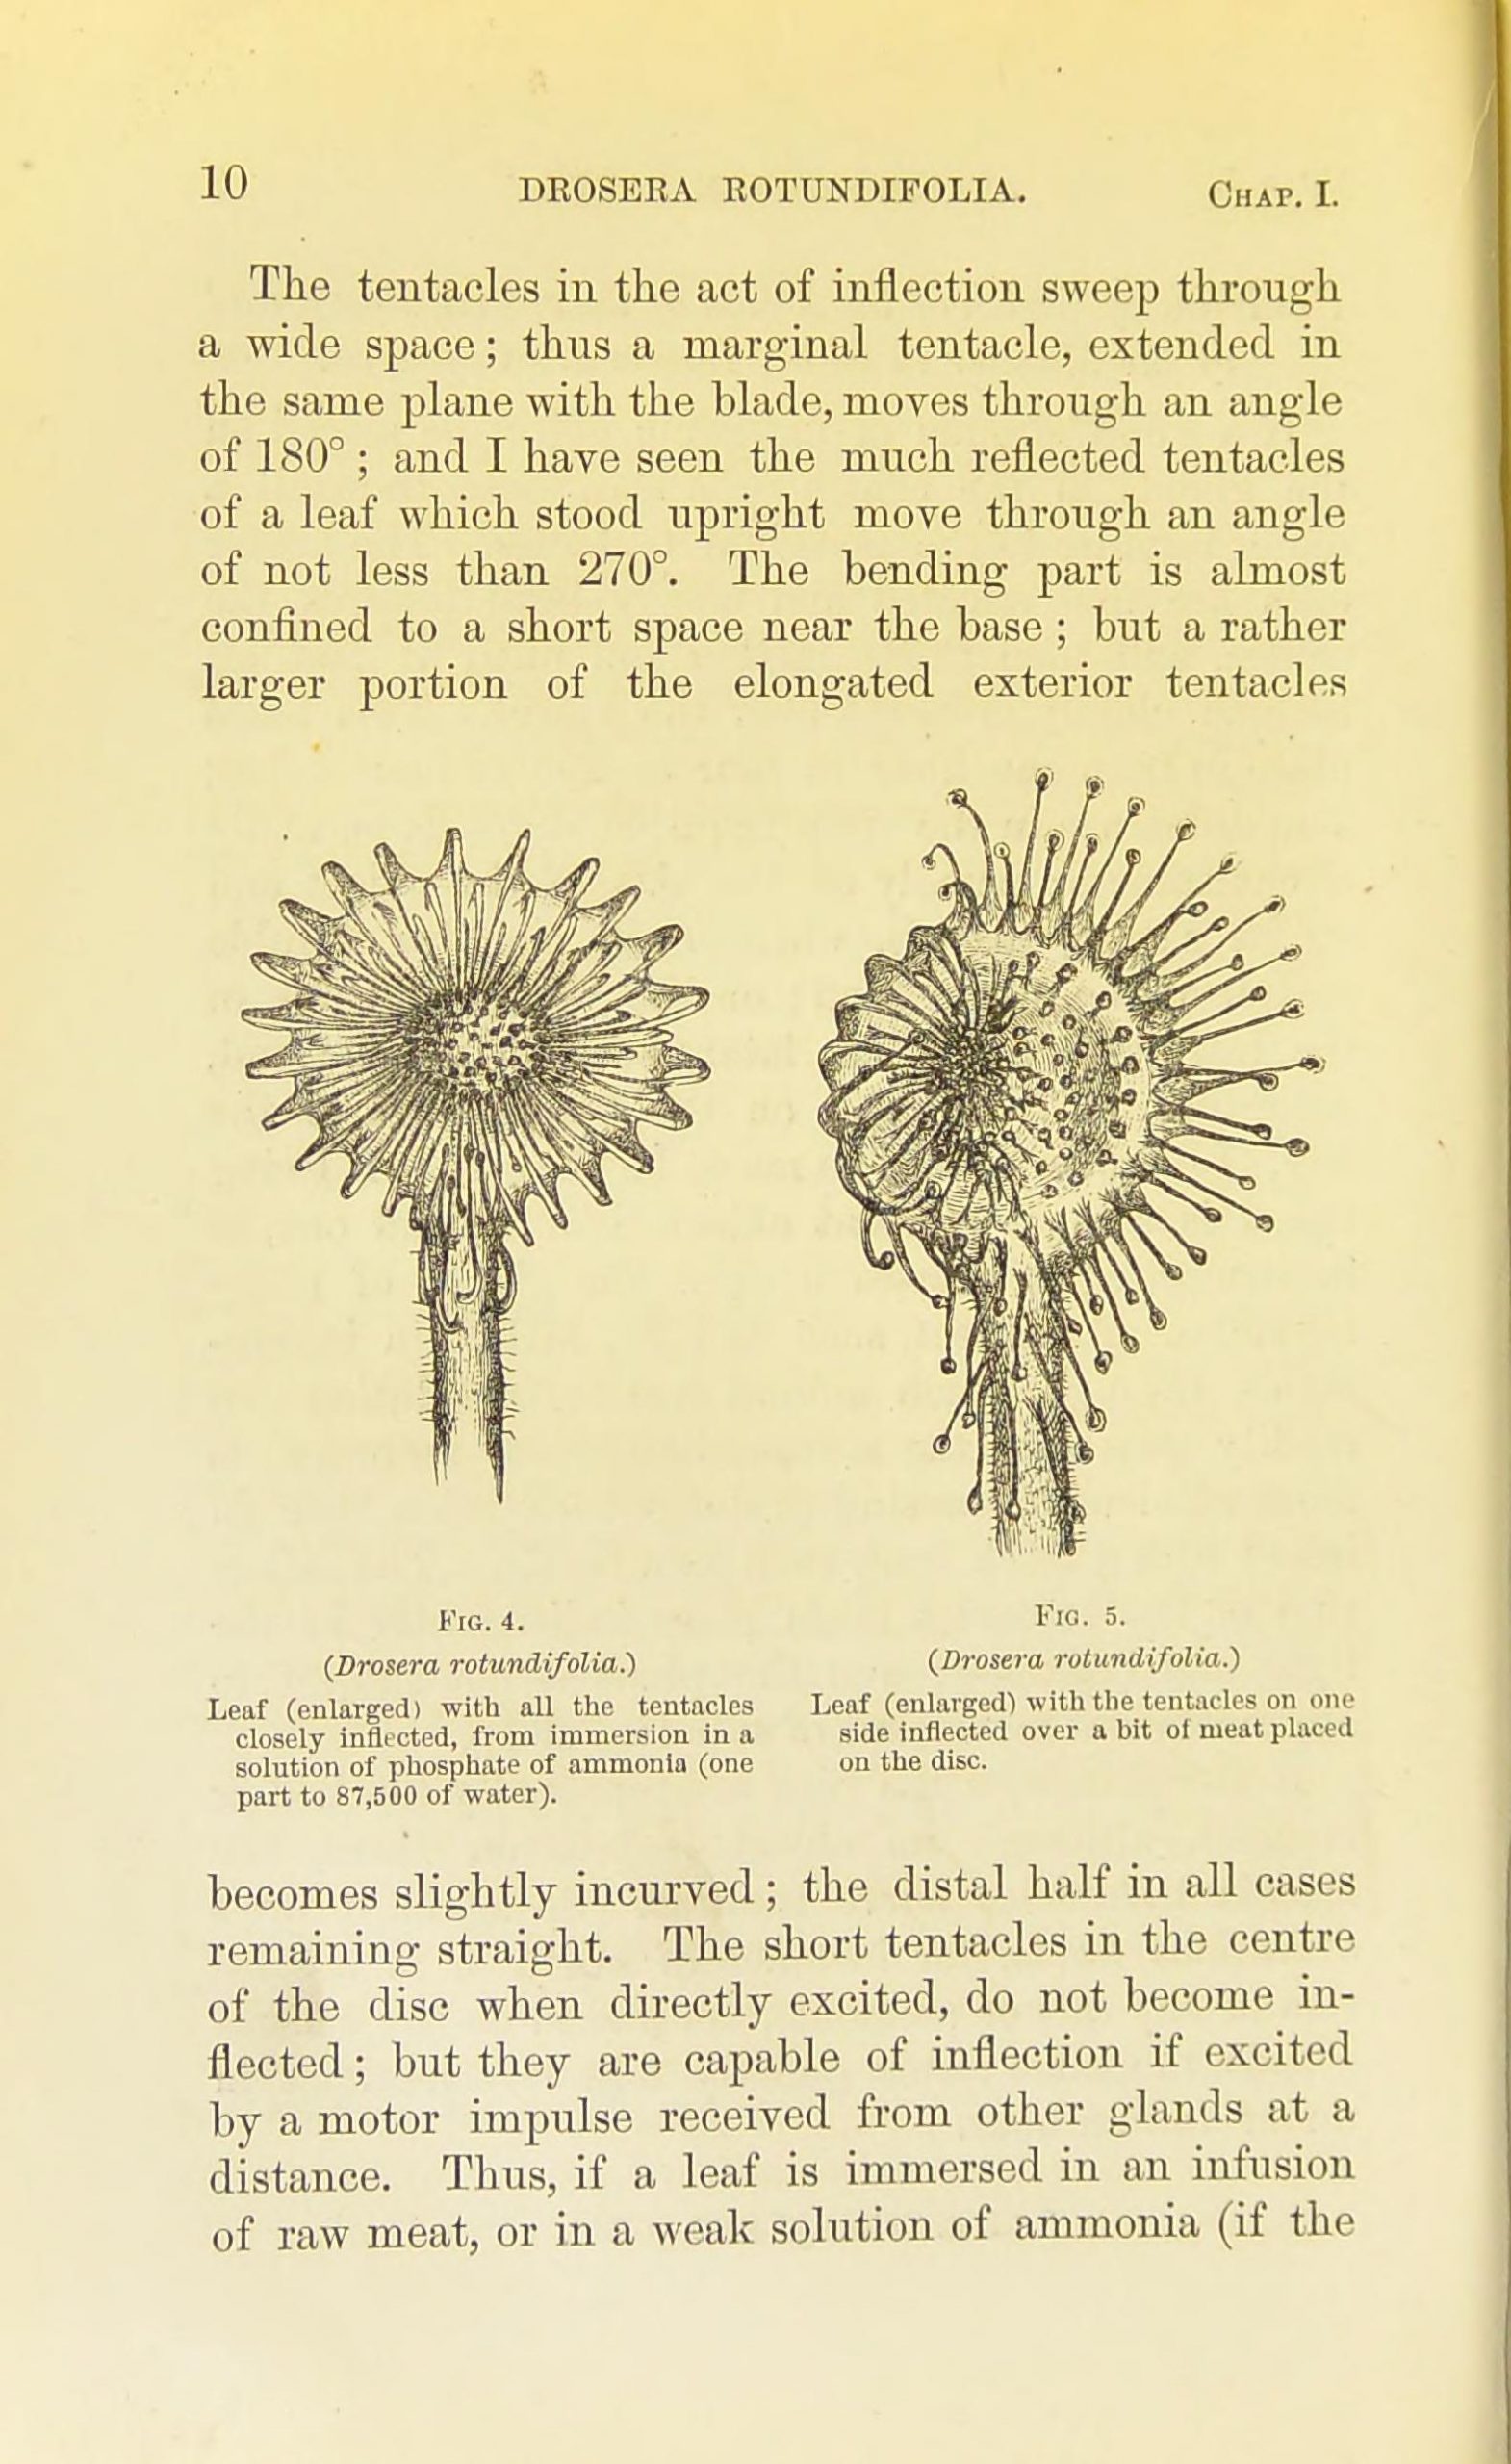 Two black and white sketches of open and closed tentacles of the sundew plant, surrounded by descriptive text of the species